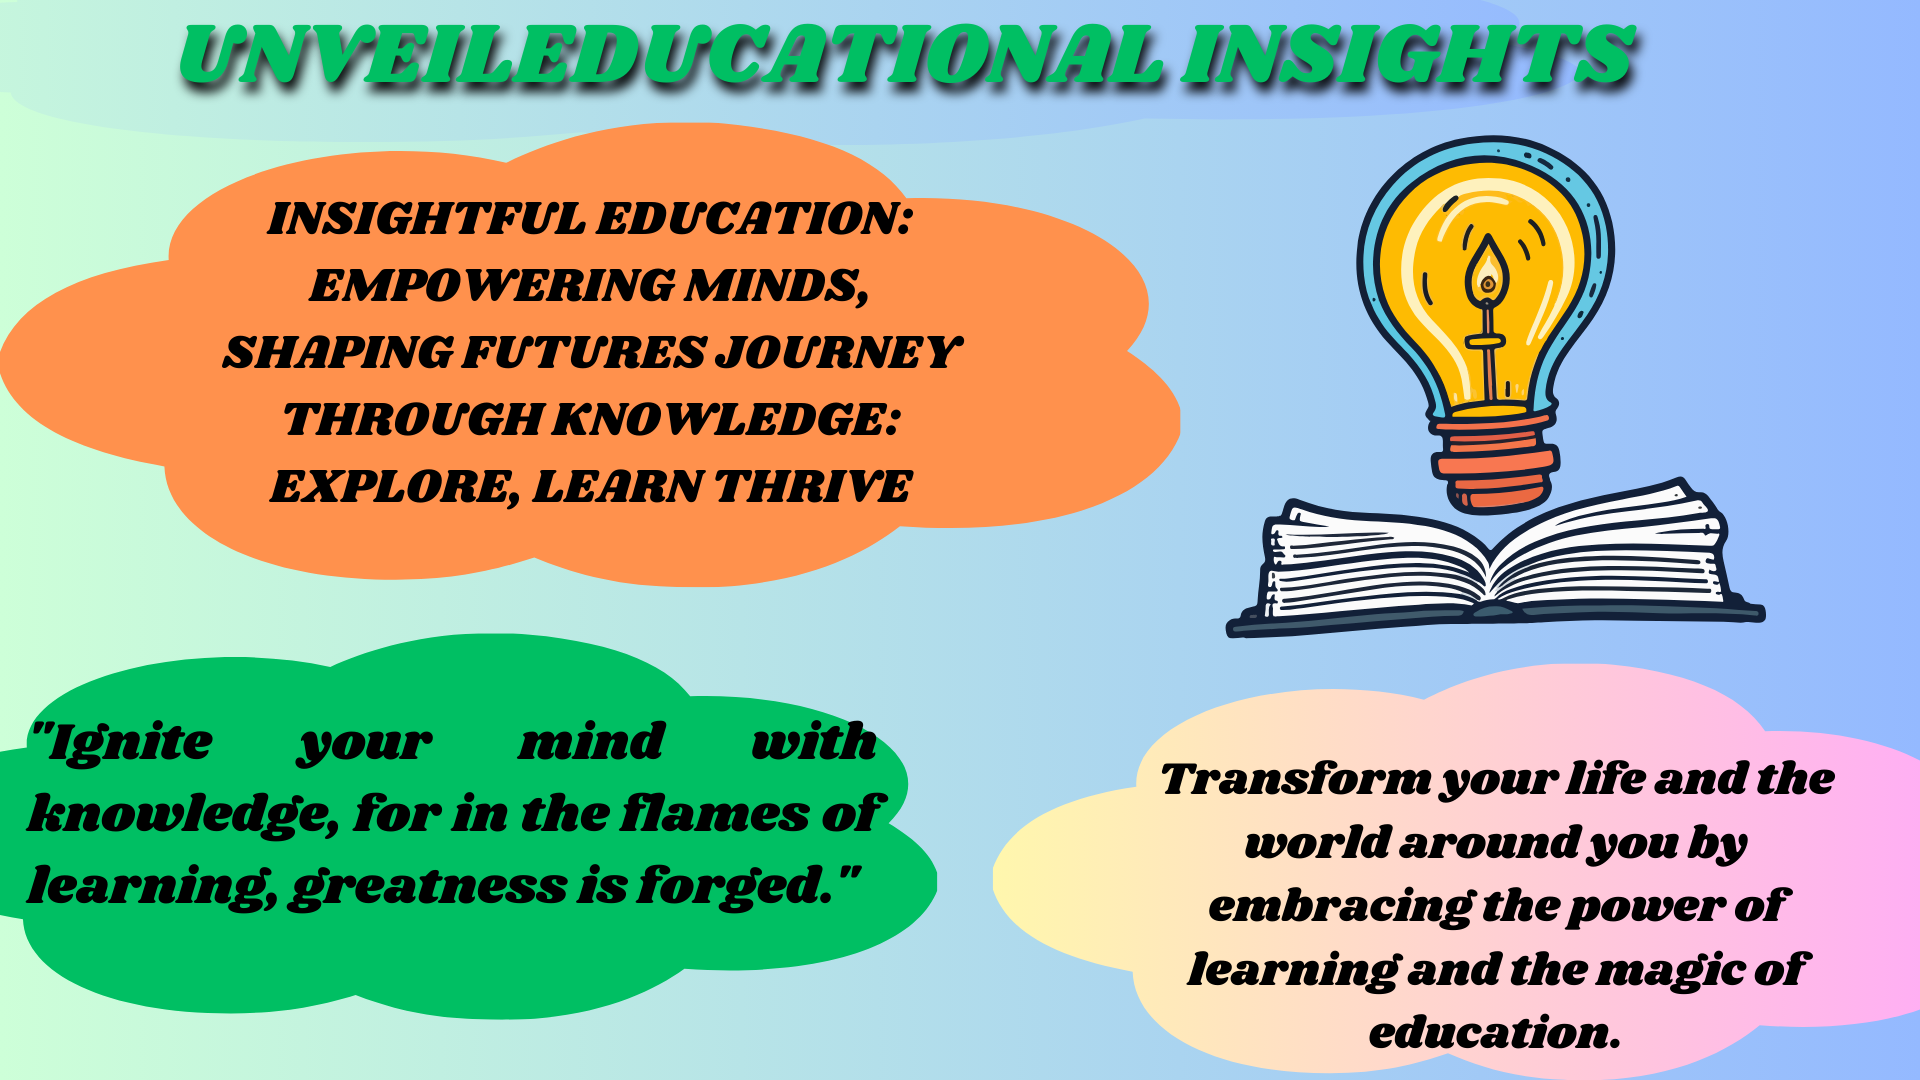 UNVEILEDUCATIONAL INSIGHTS